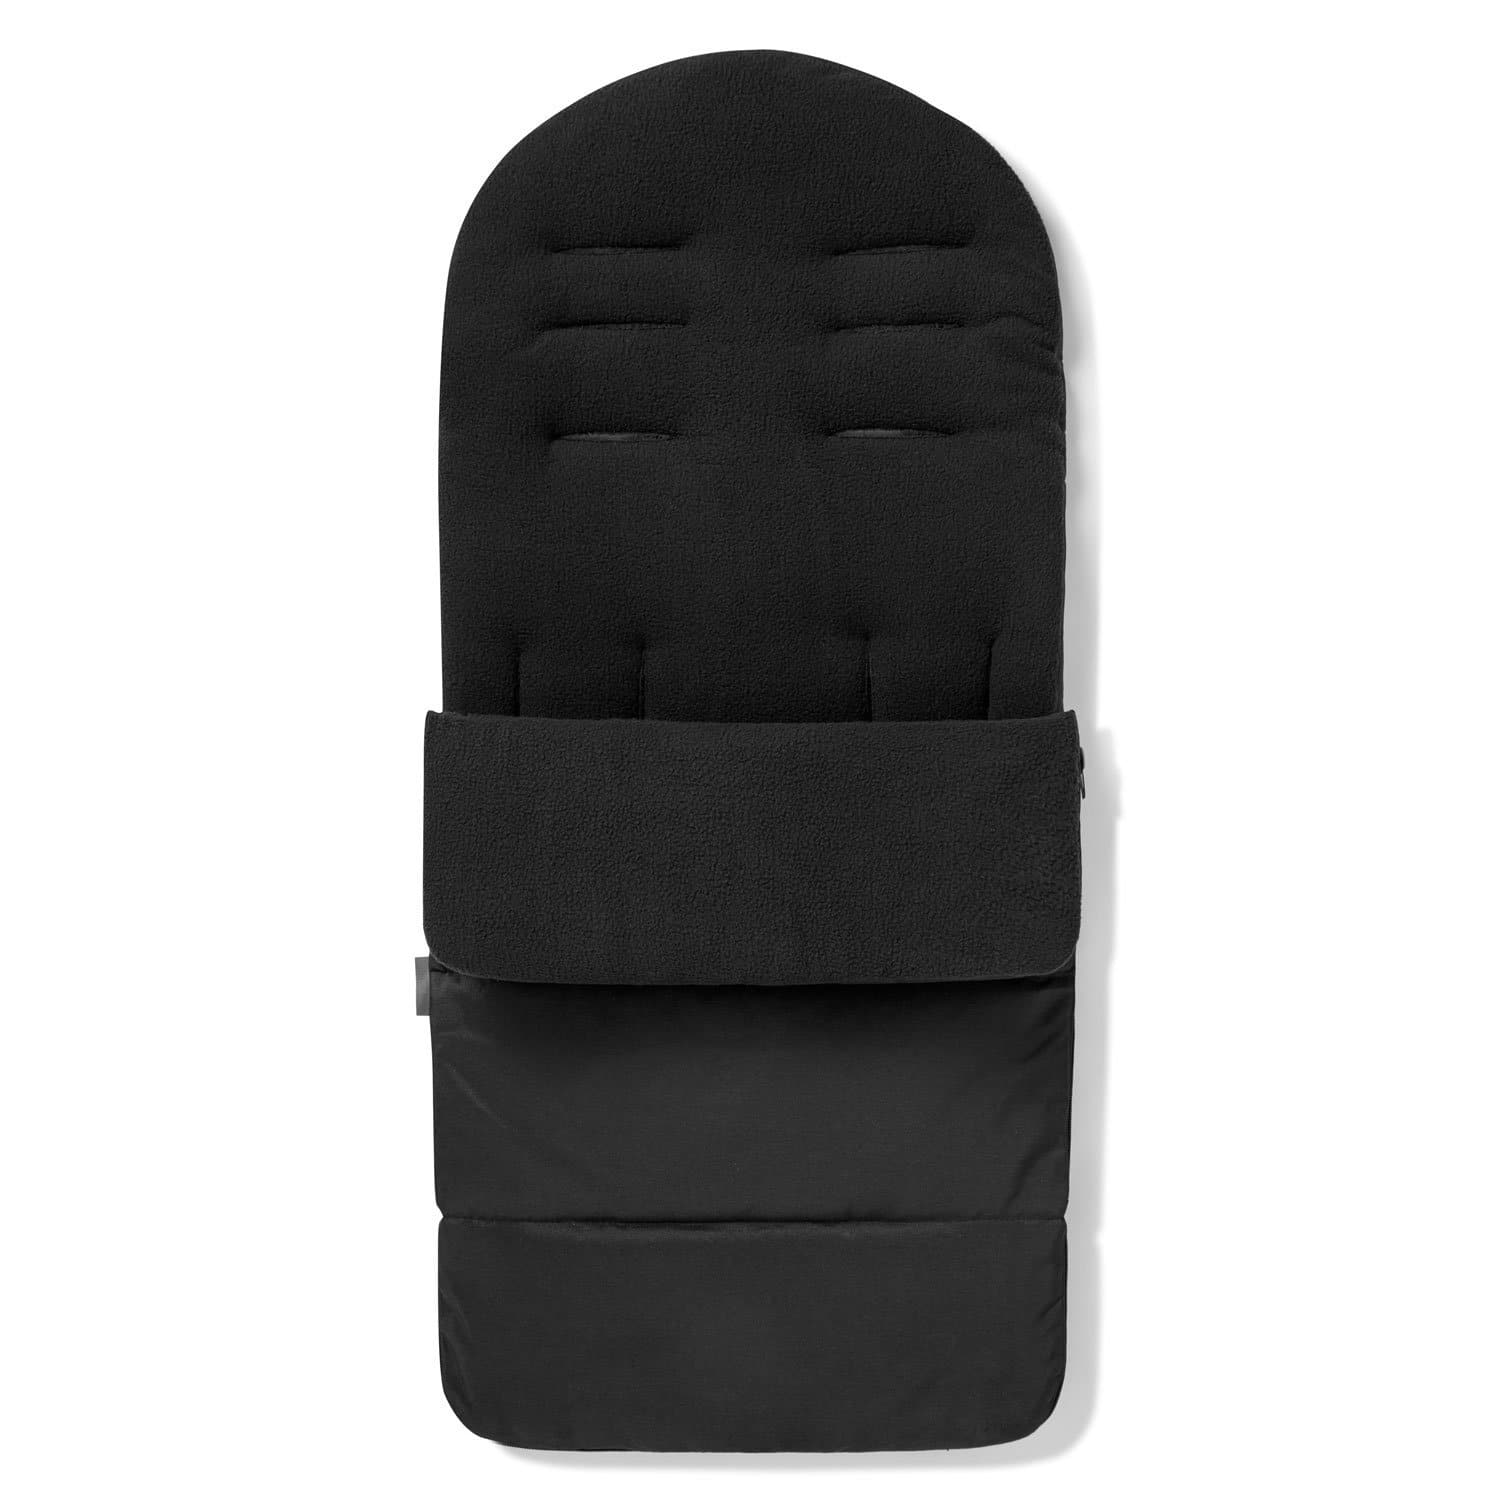 Premium Footmuff / Cosy Toes Compatible with Mamas & Papas - Black Jack / Fits All Models | For Your Little One